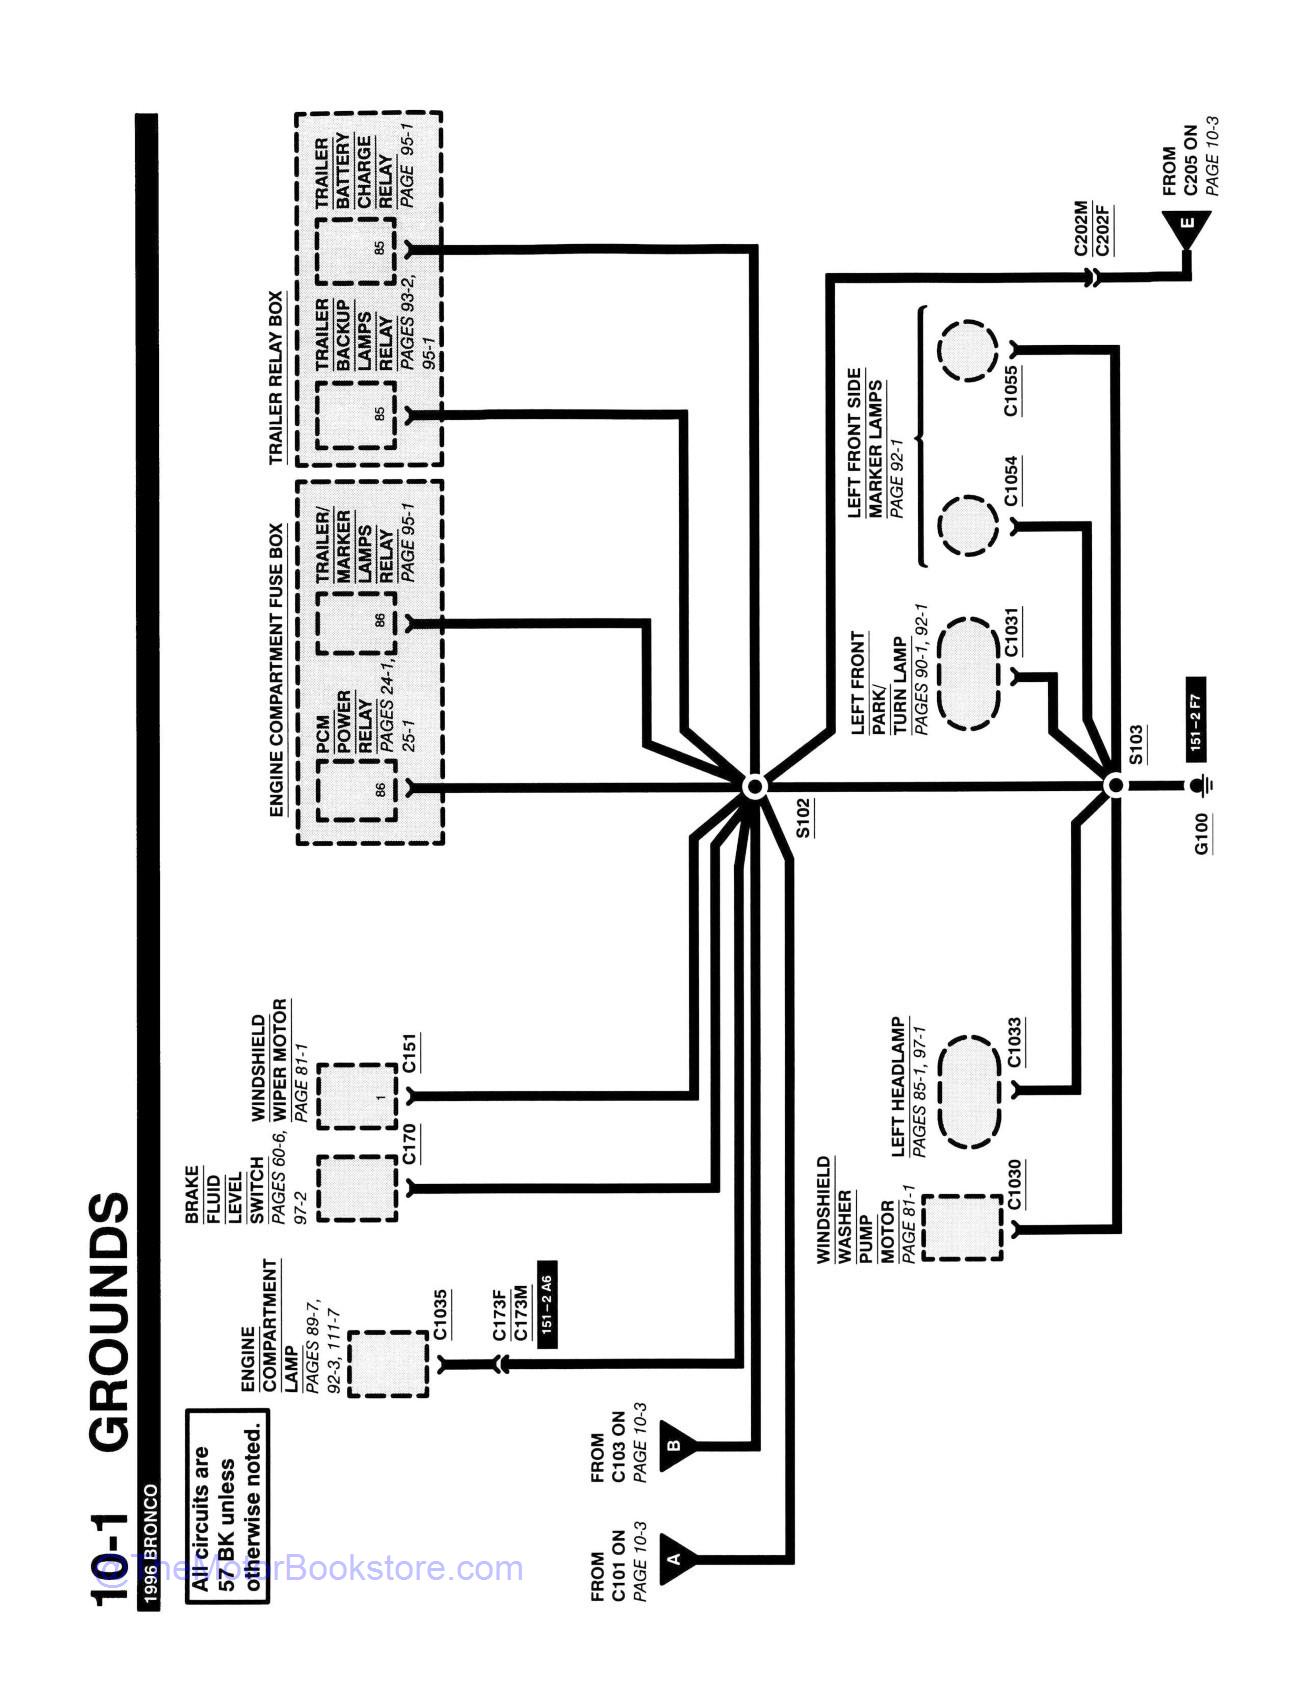 1996 Ford Bronco Electrical Vacuum Troubleshooting Manual - Sample Page 1